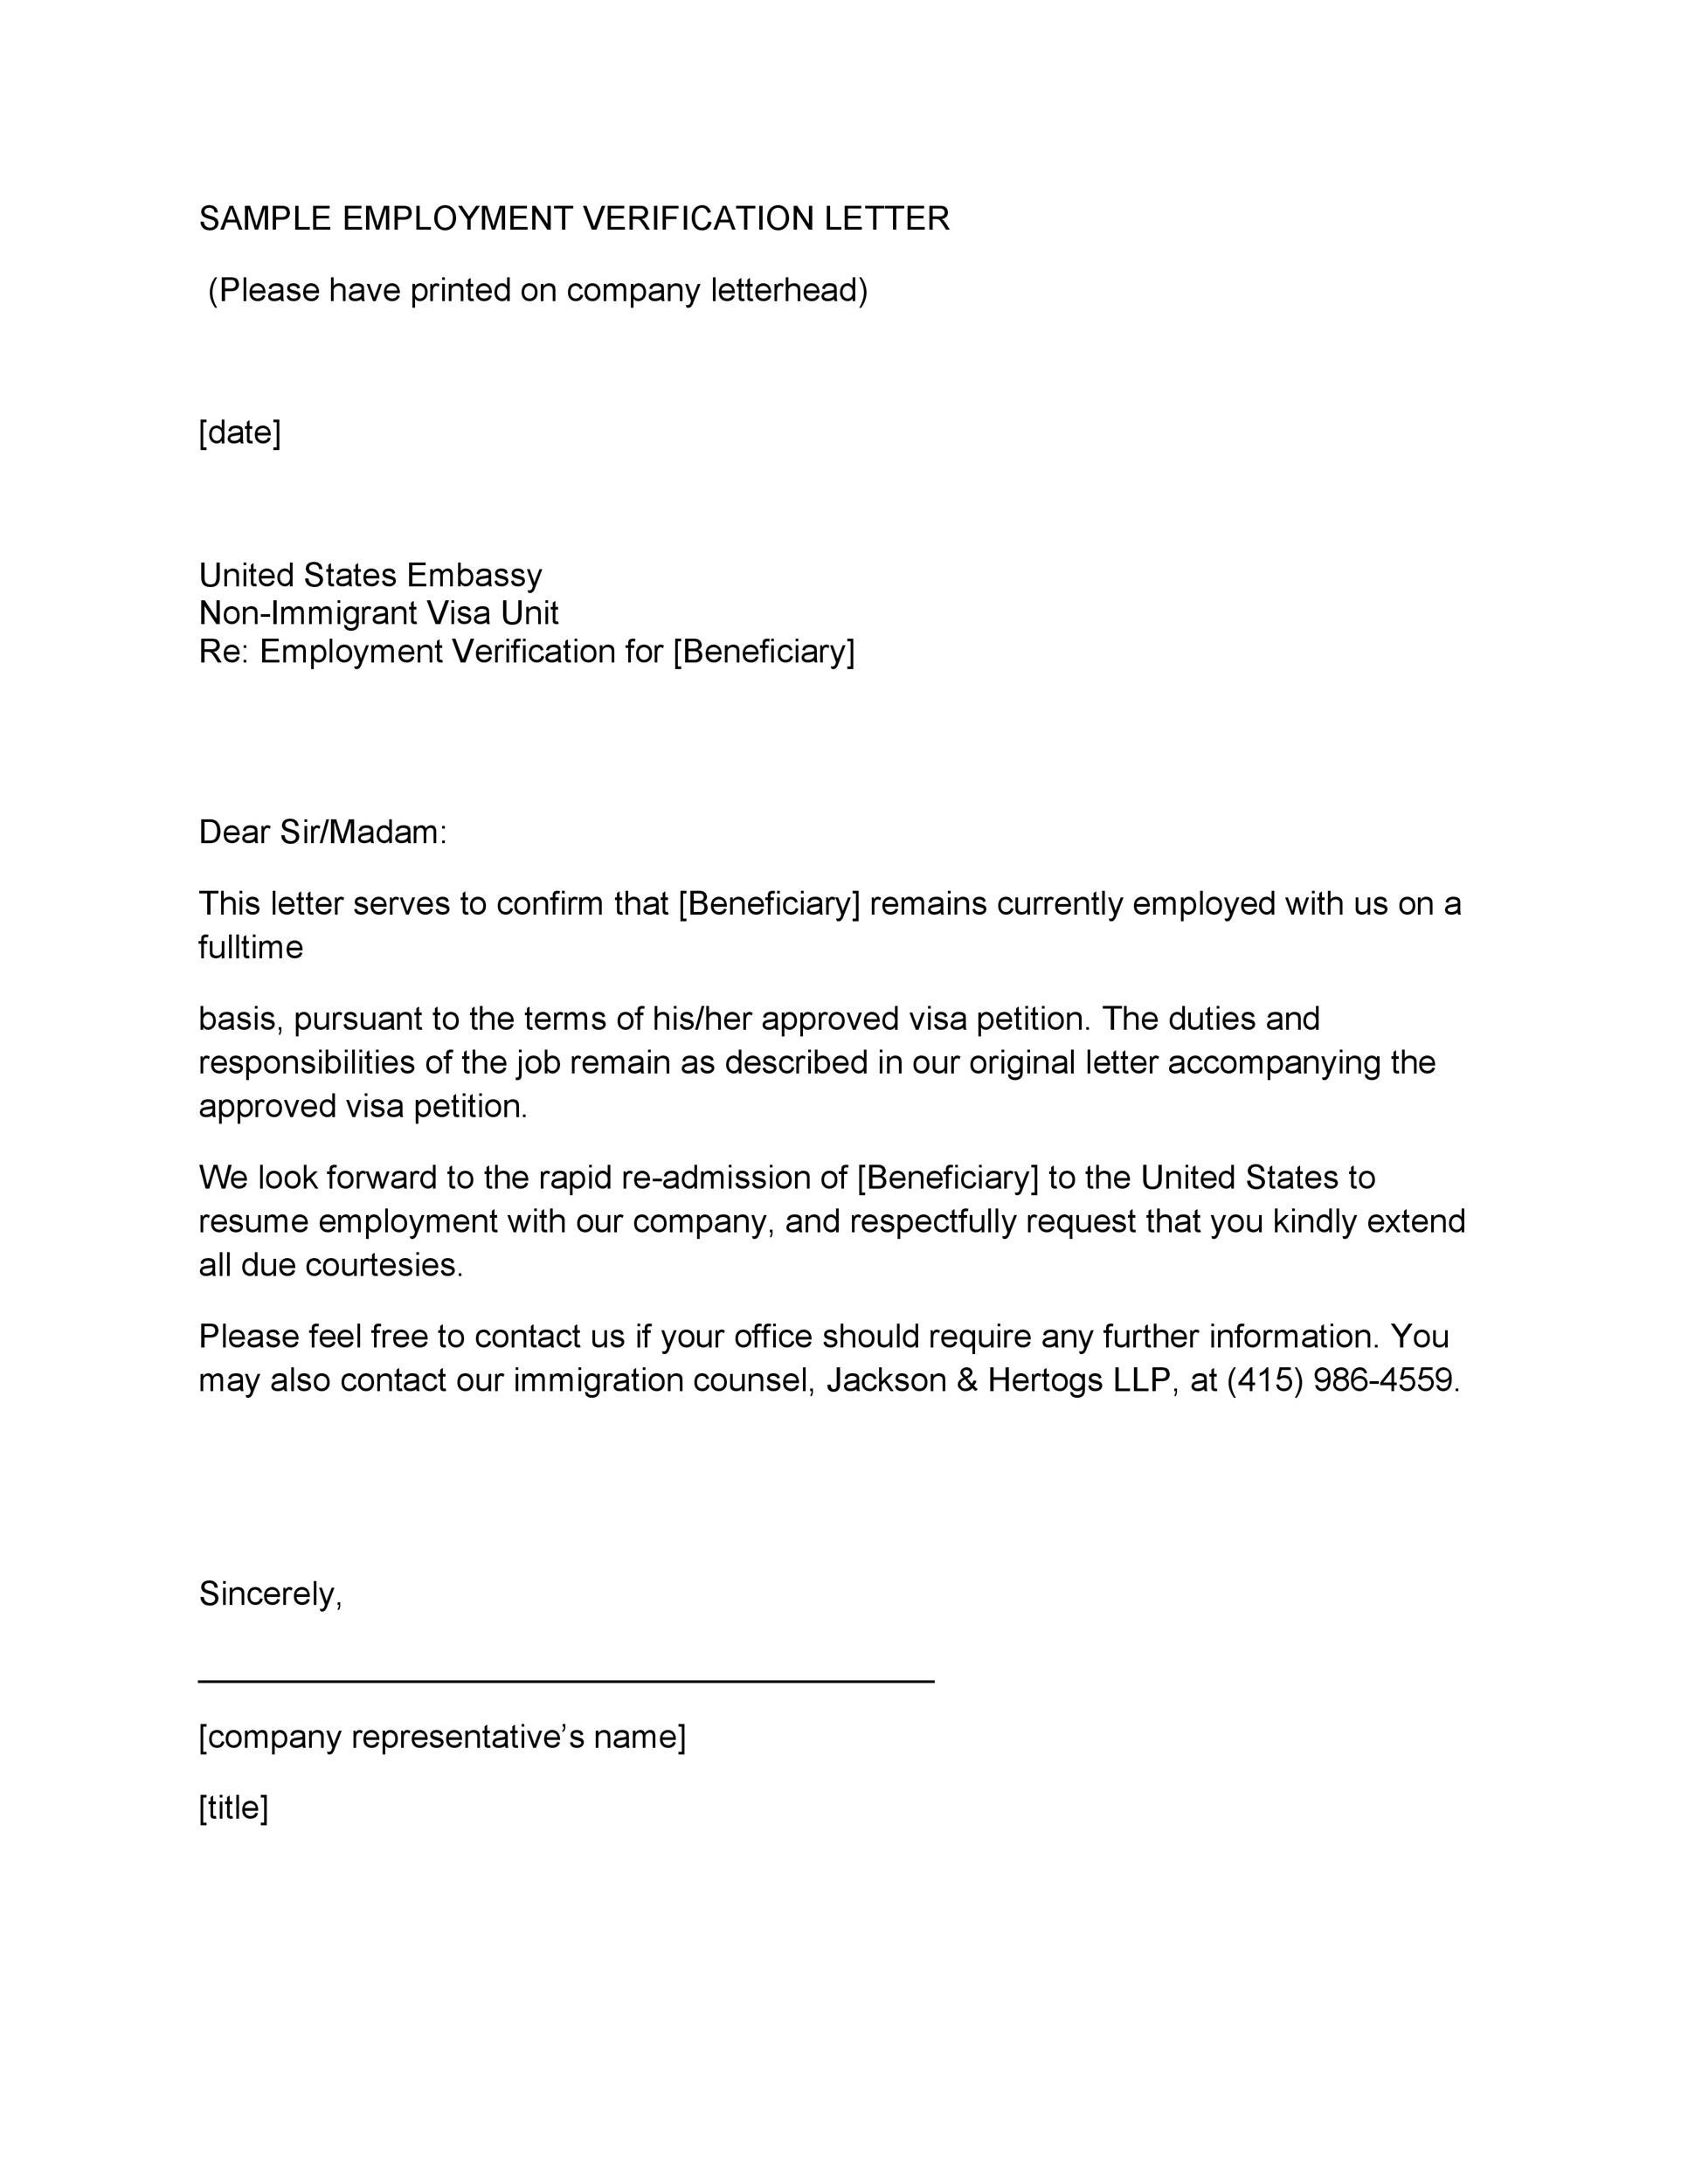 Confirmation Letter For Employment from templatelab.com